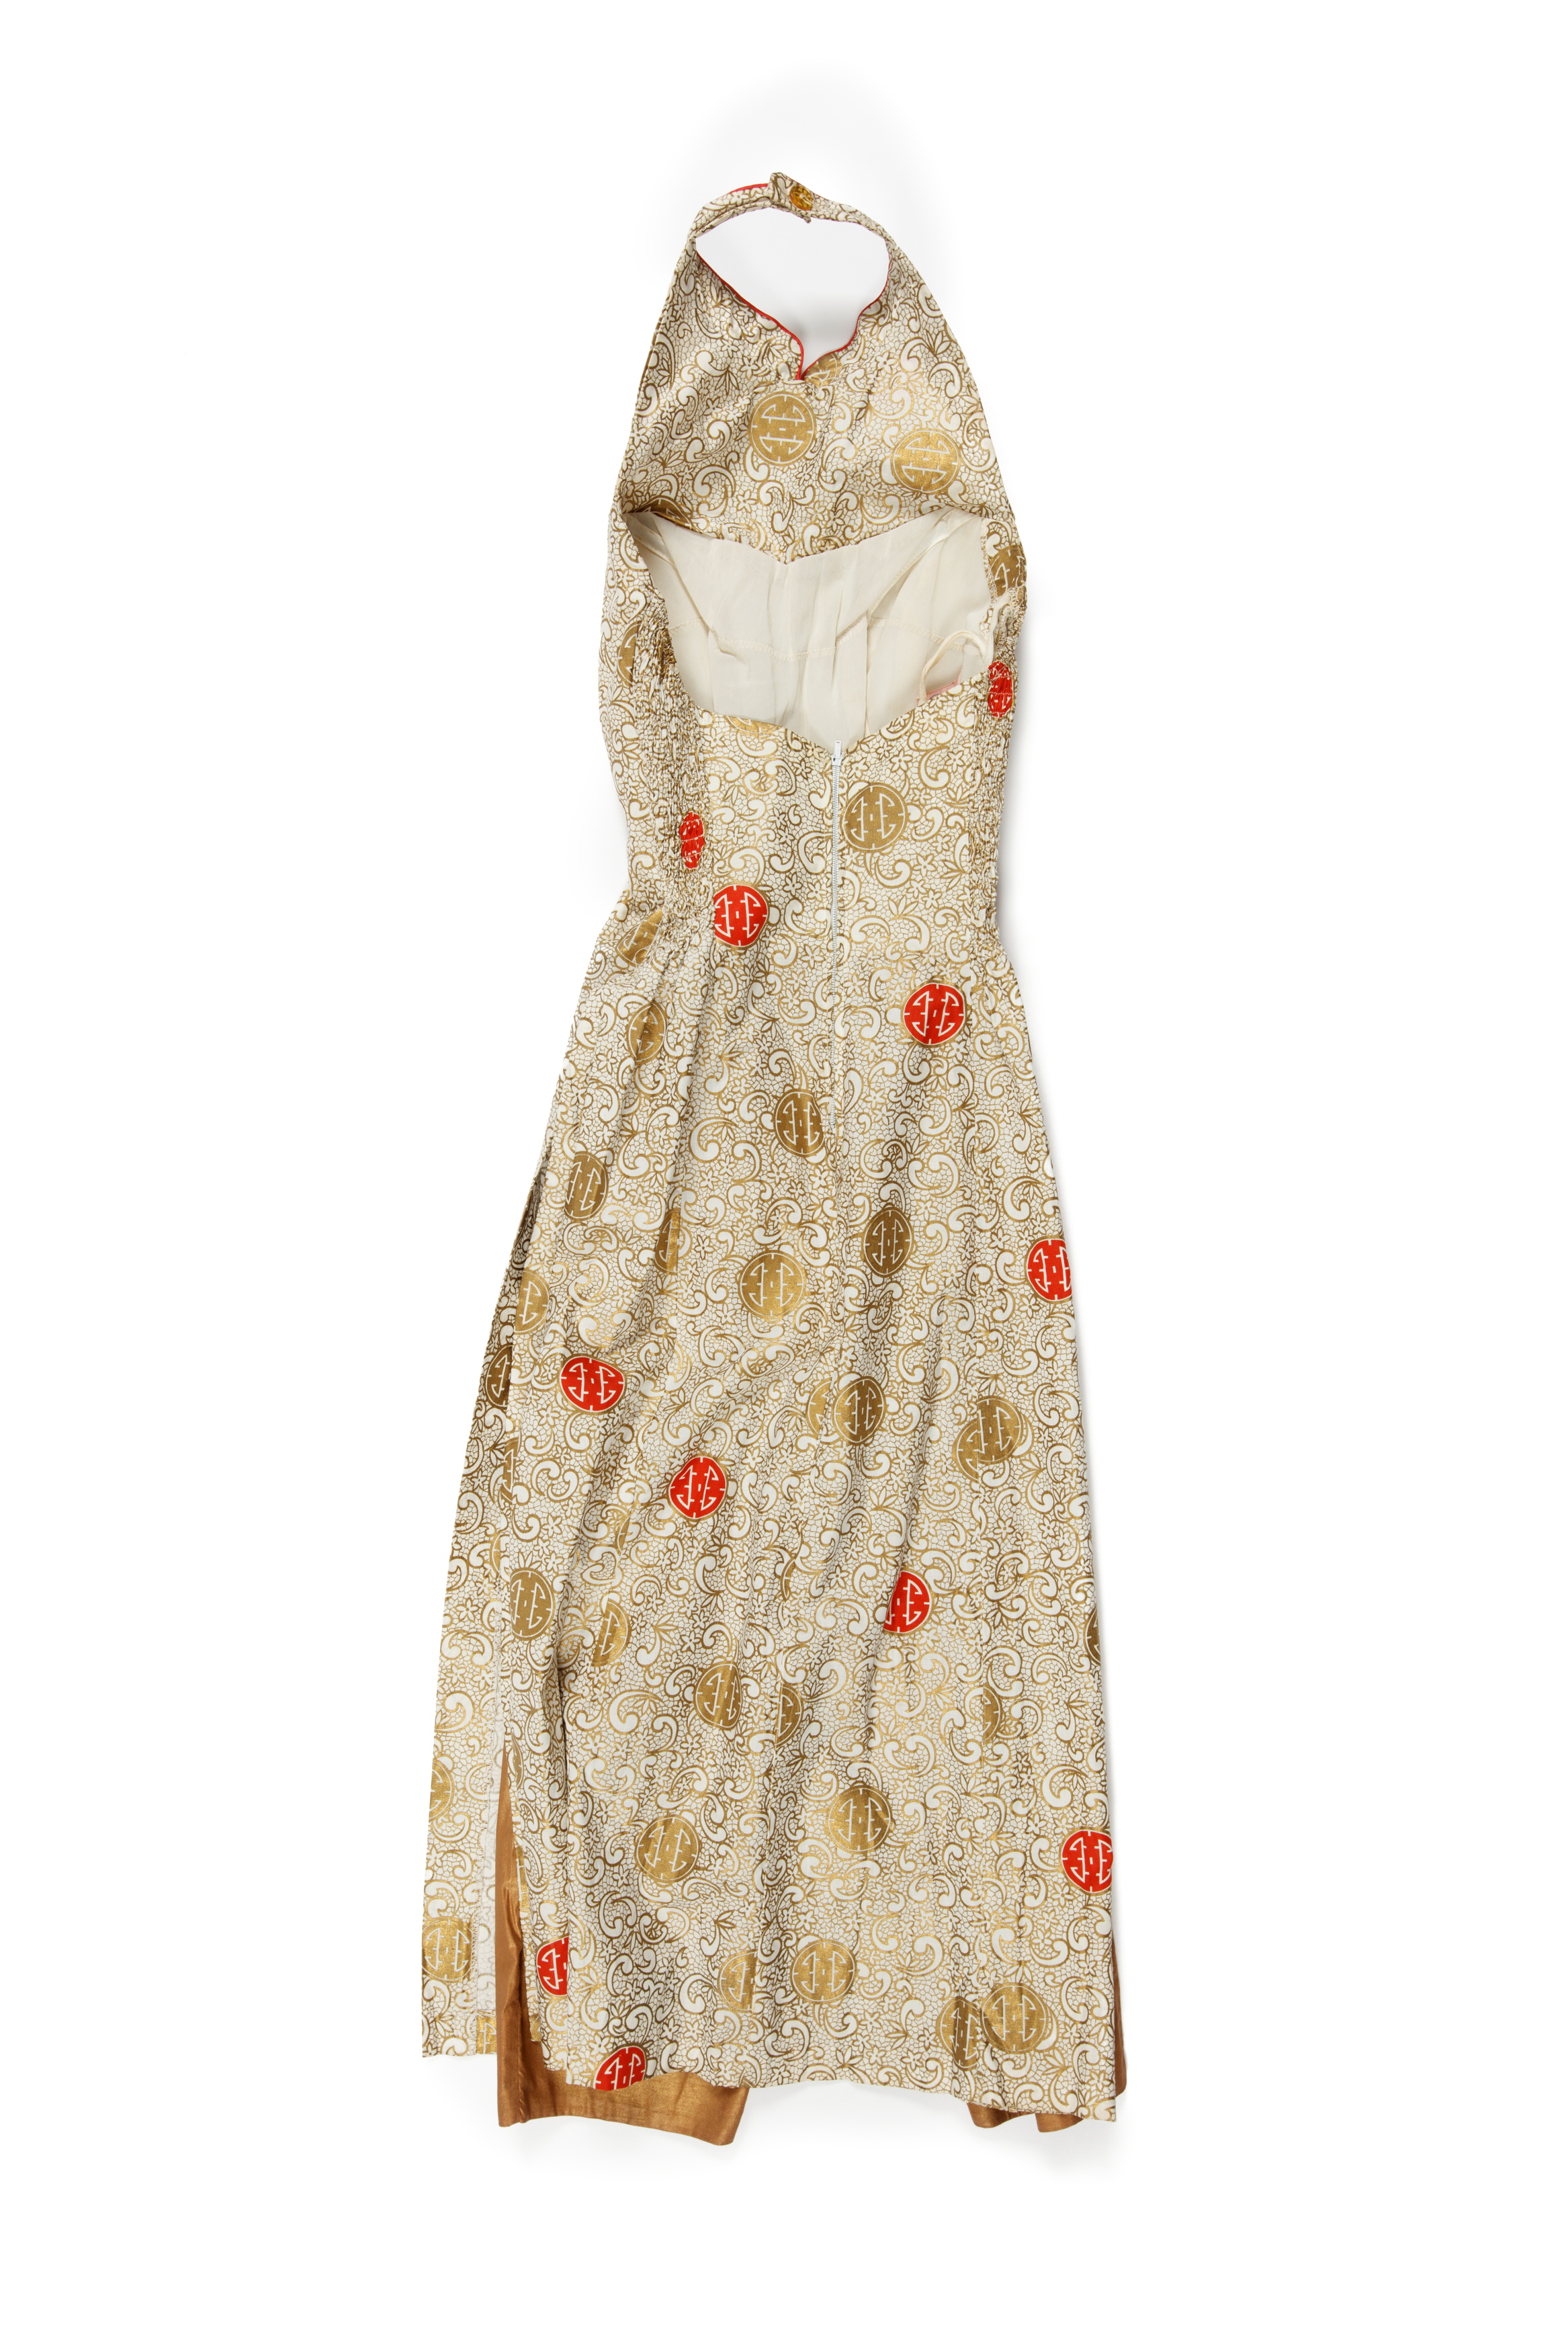 Womens sundress by Cole of California